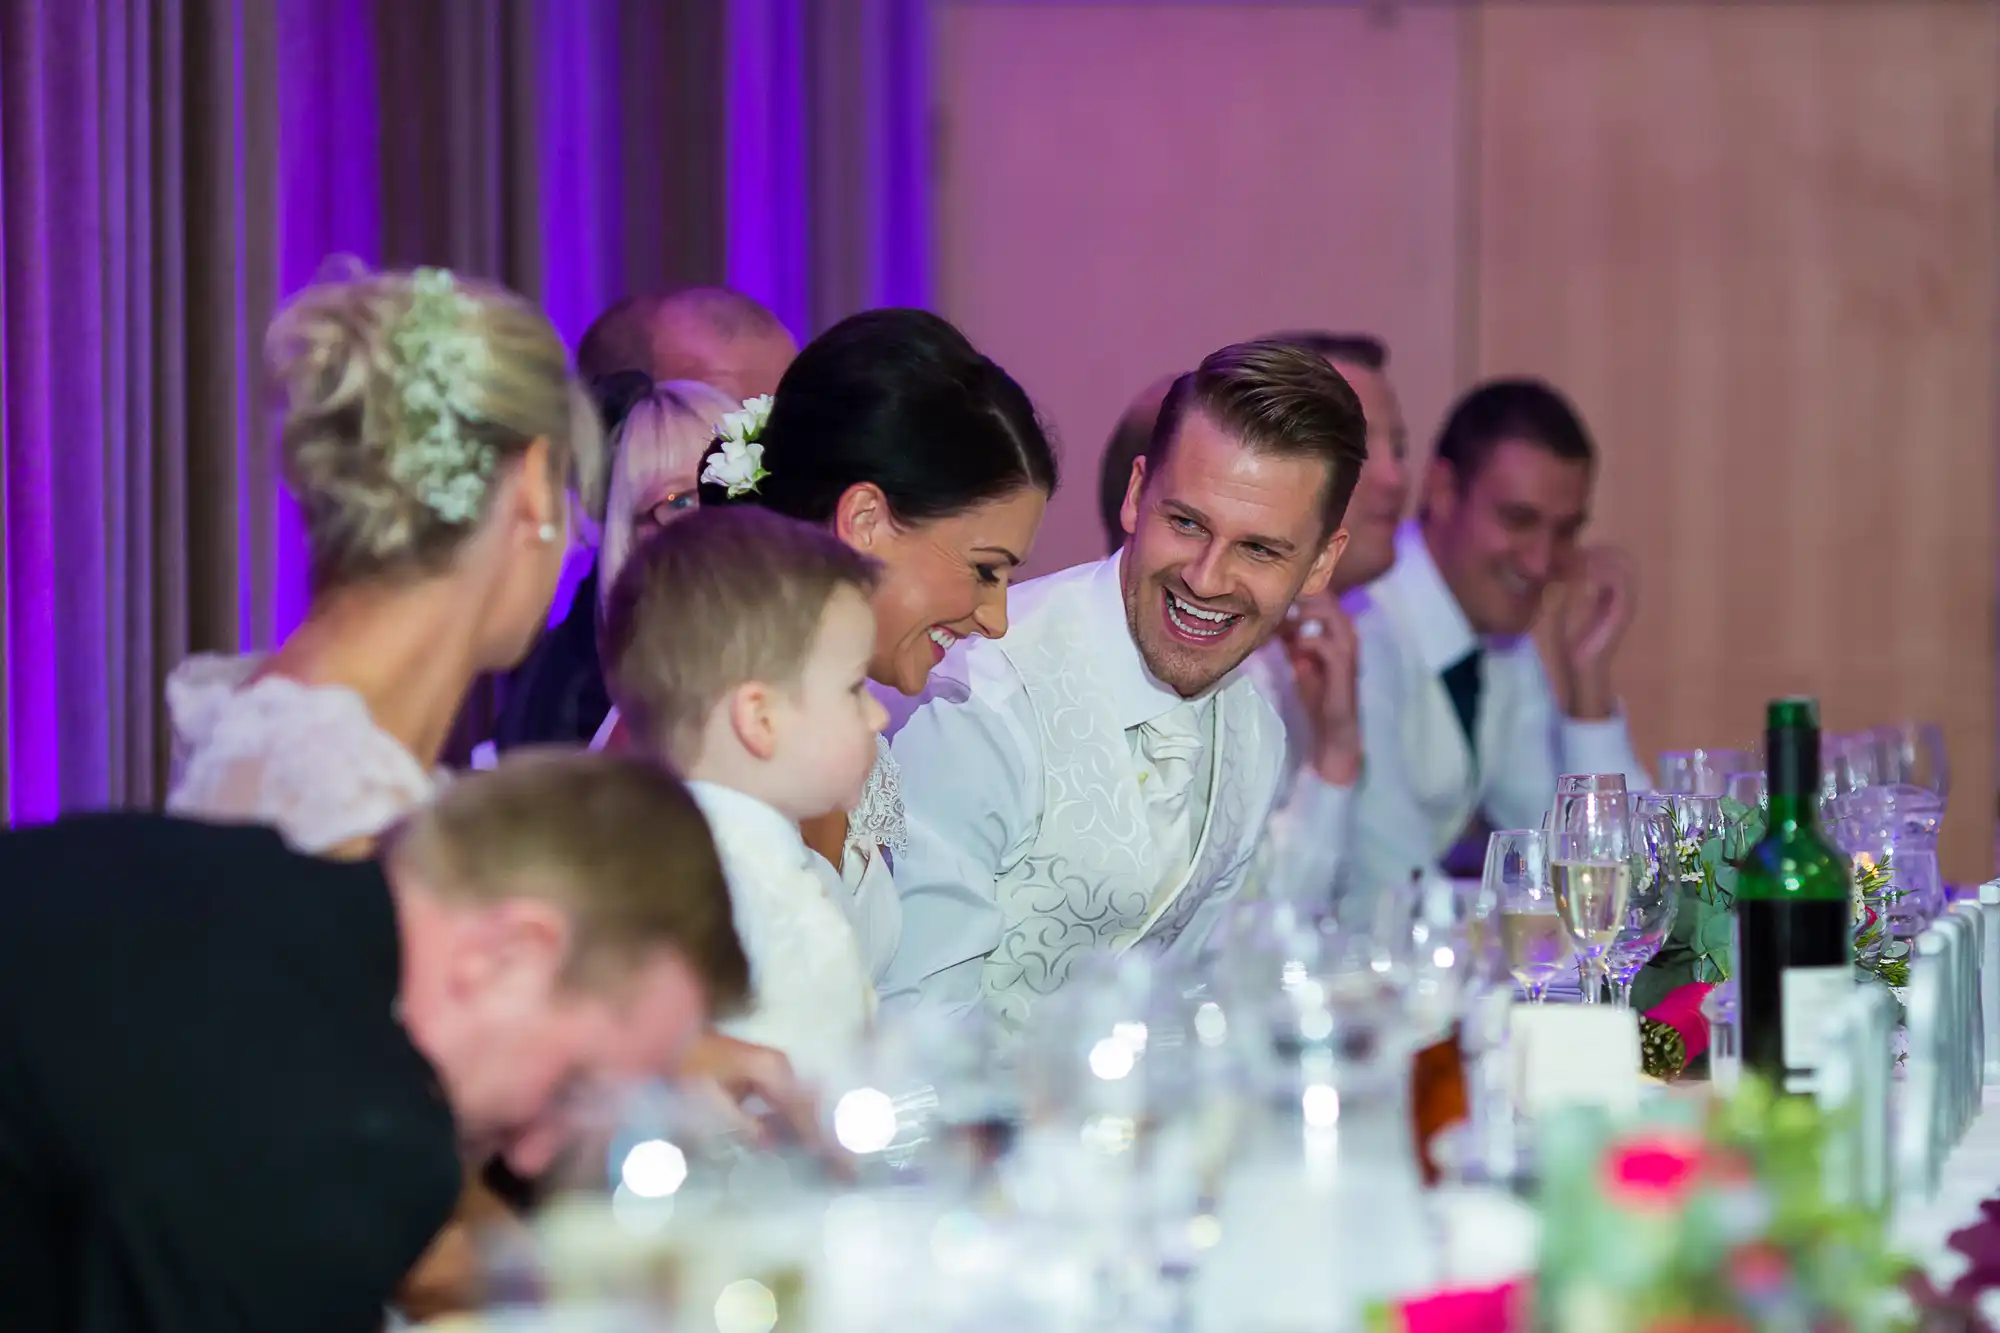 A joyful couple laughing at a wedding reception table surrounded by guests and decorated with elegant dinnerware.